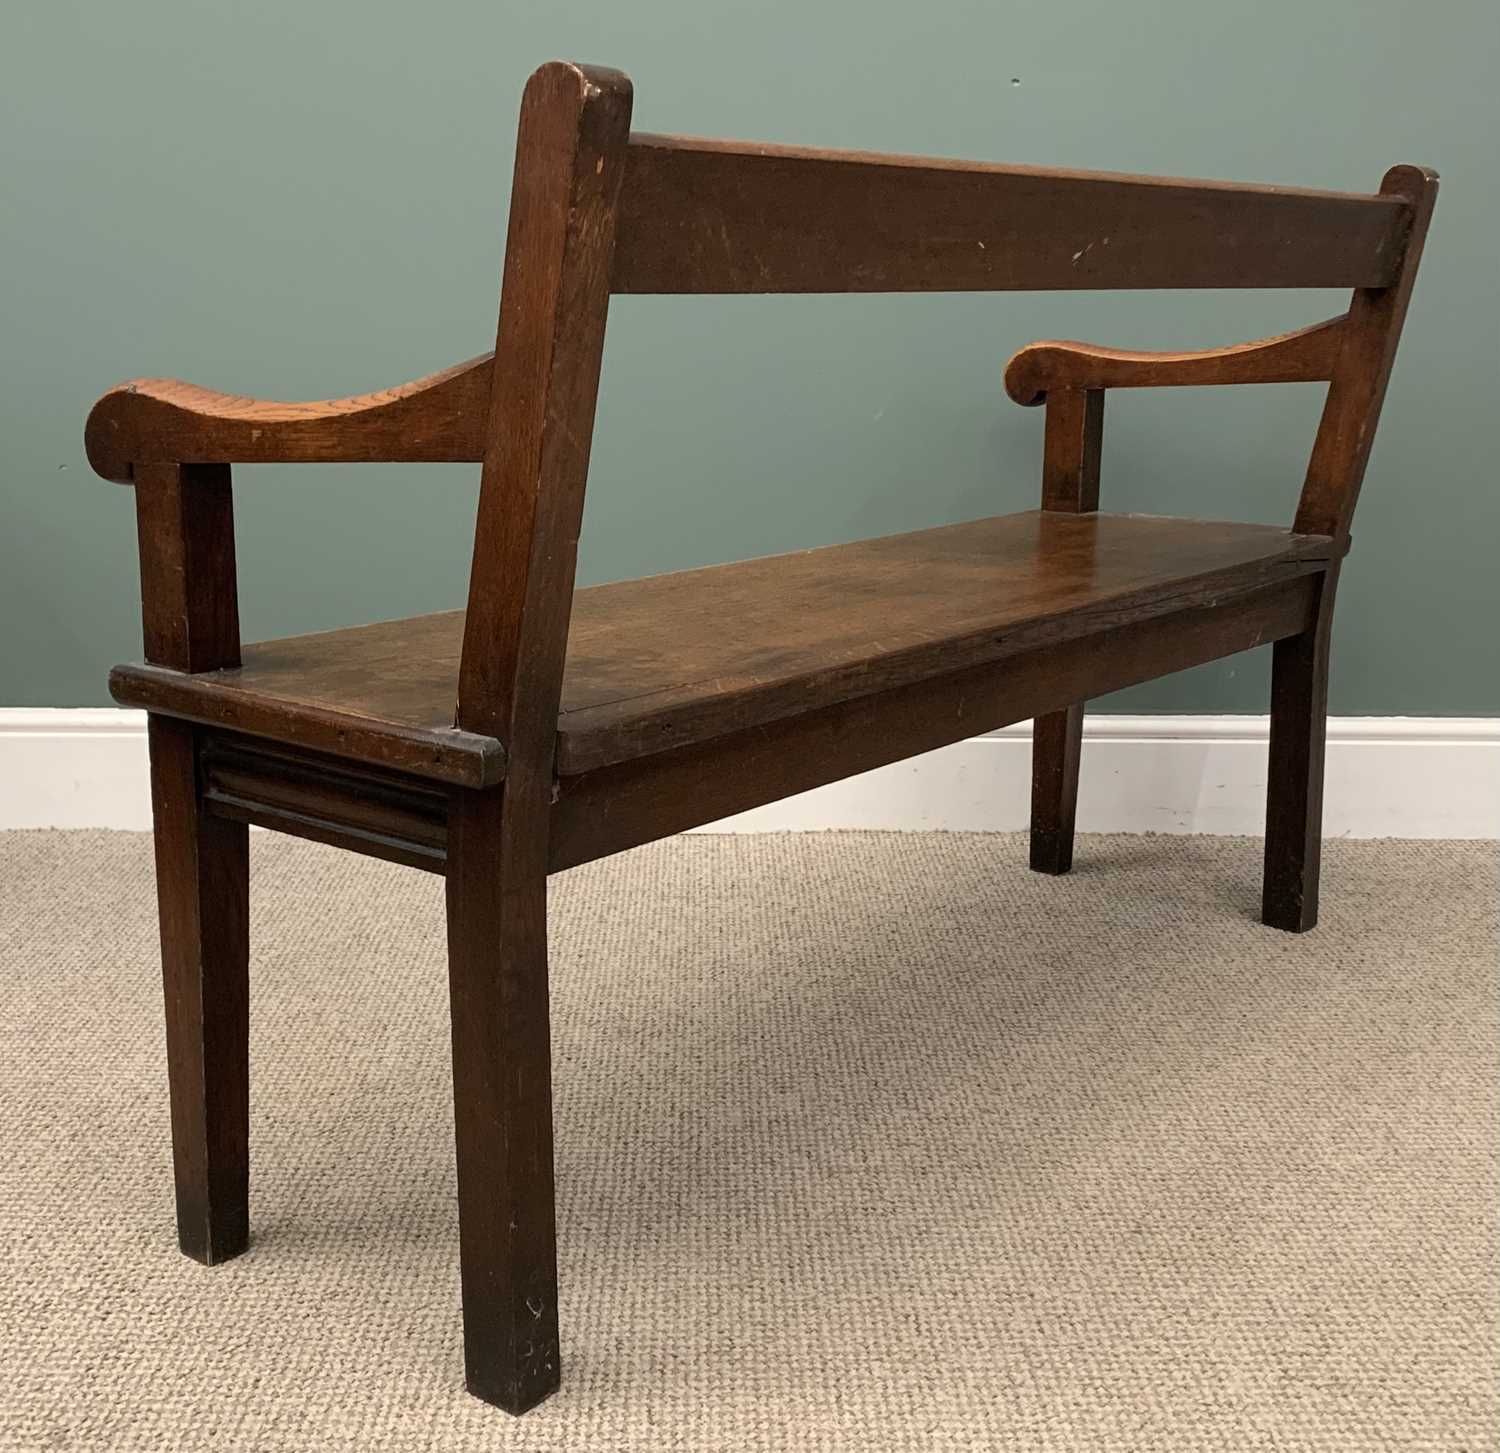 ANTIQUE OAK BENCH with scrolled arms and single rail back, 87 (h) x 141 (w) x 51 (d) cms Provenance: - Image 2 of 3